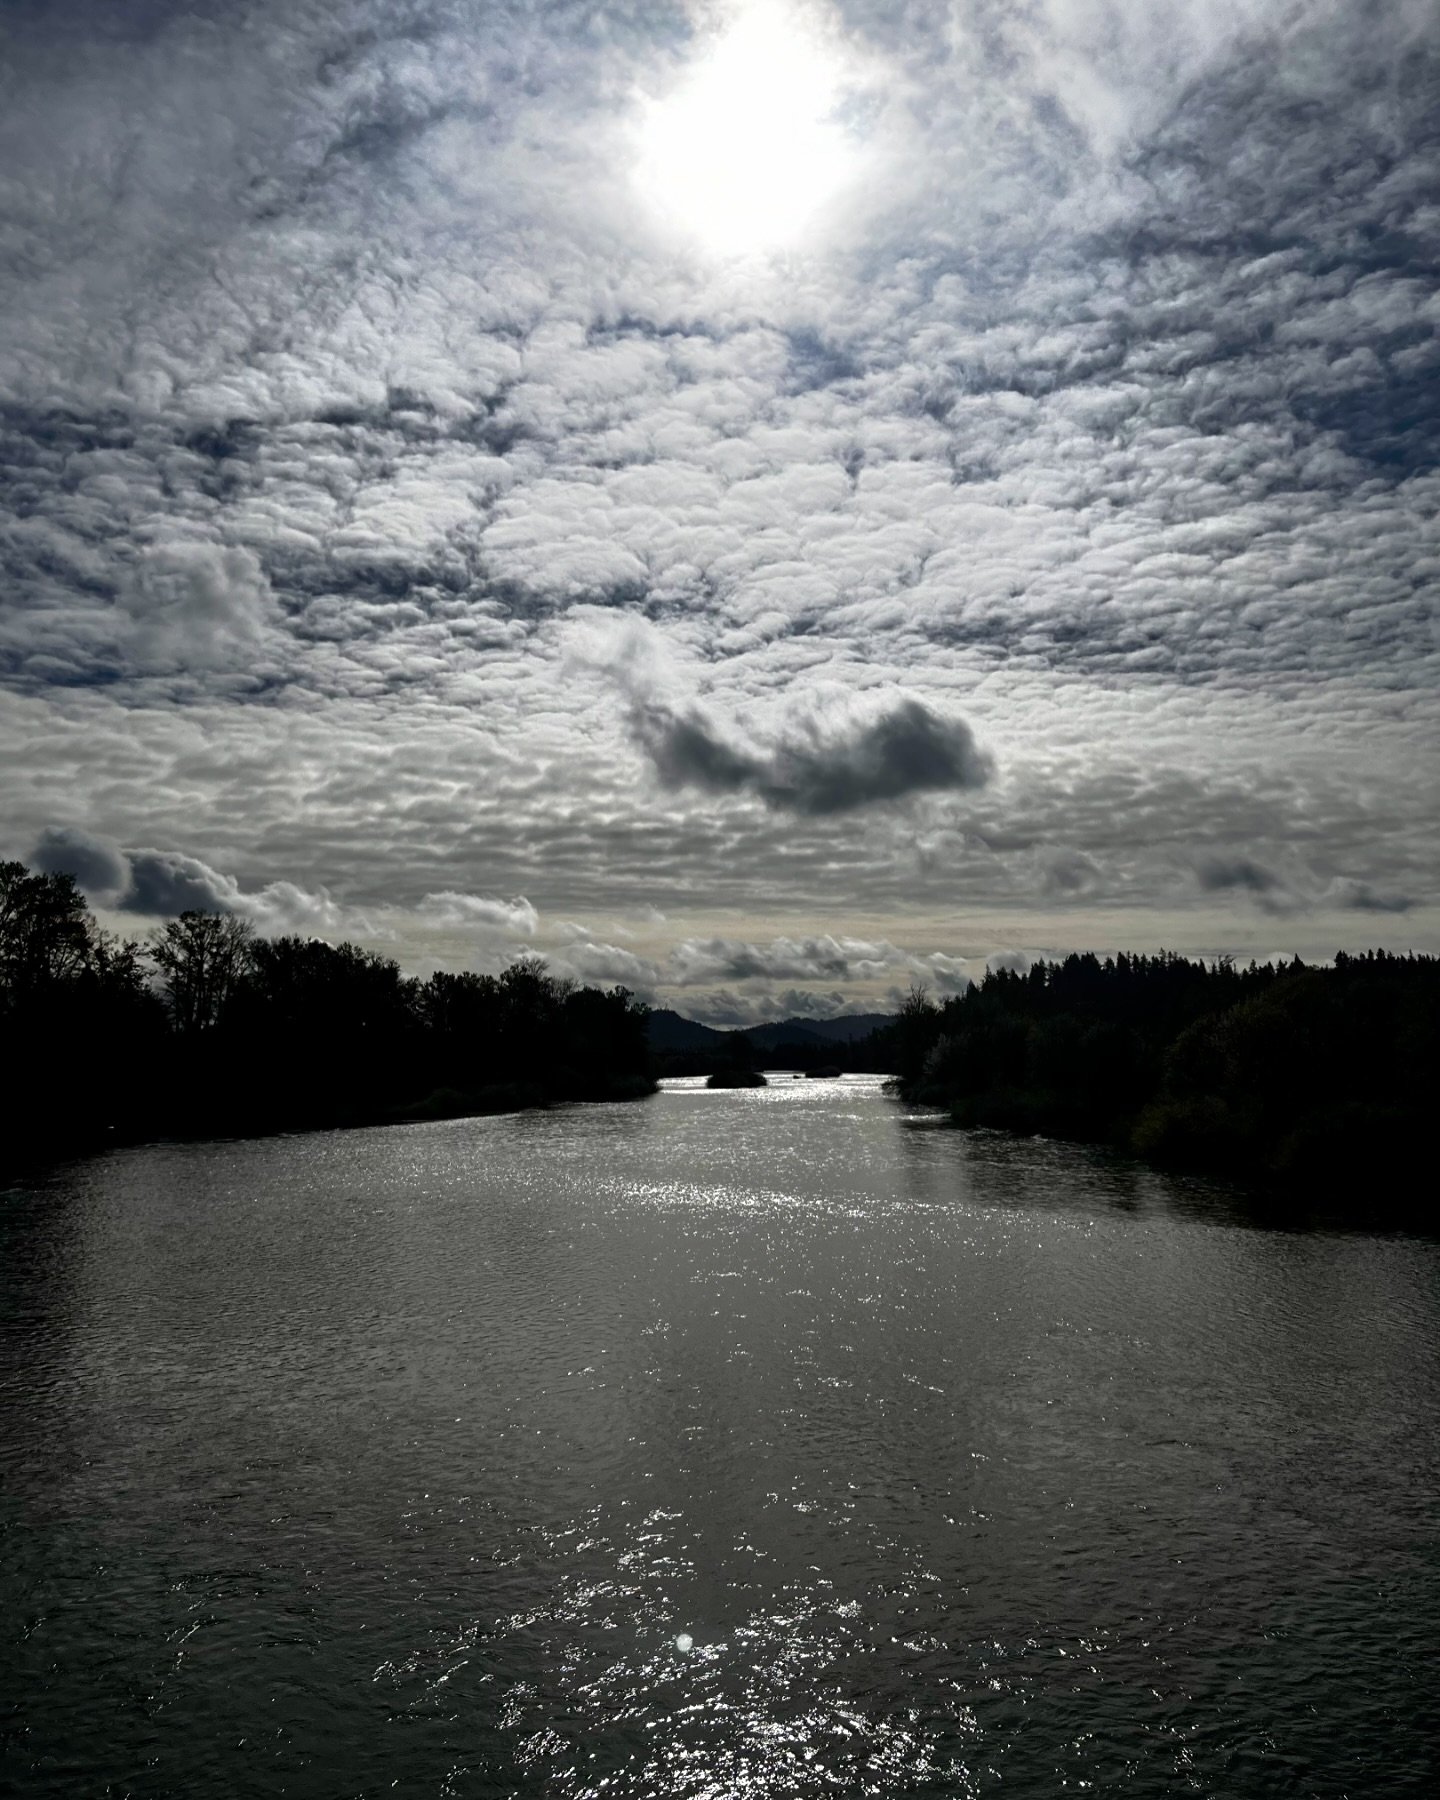 No visible eclipse during my visit to Eugene, but beautiful skies over the Willamette nonetheless.